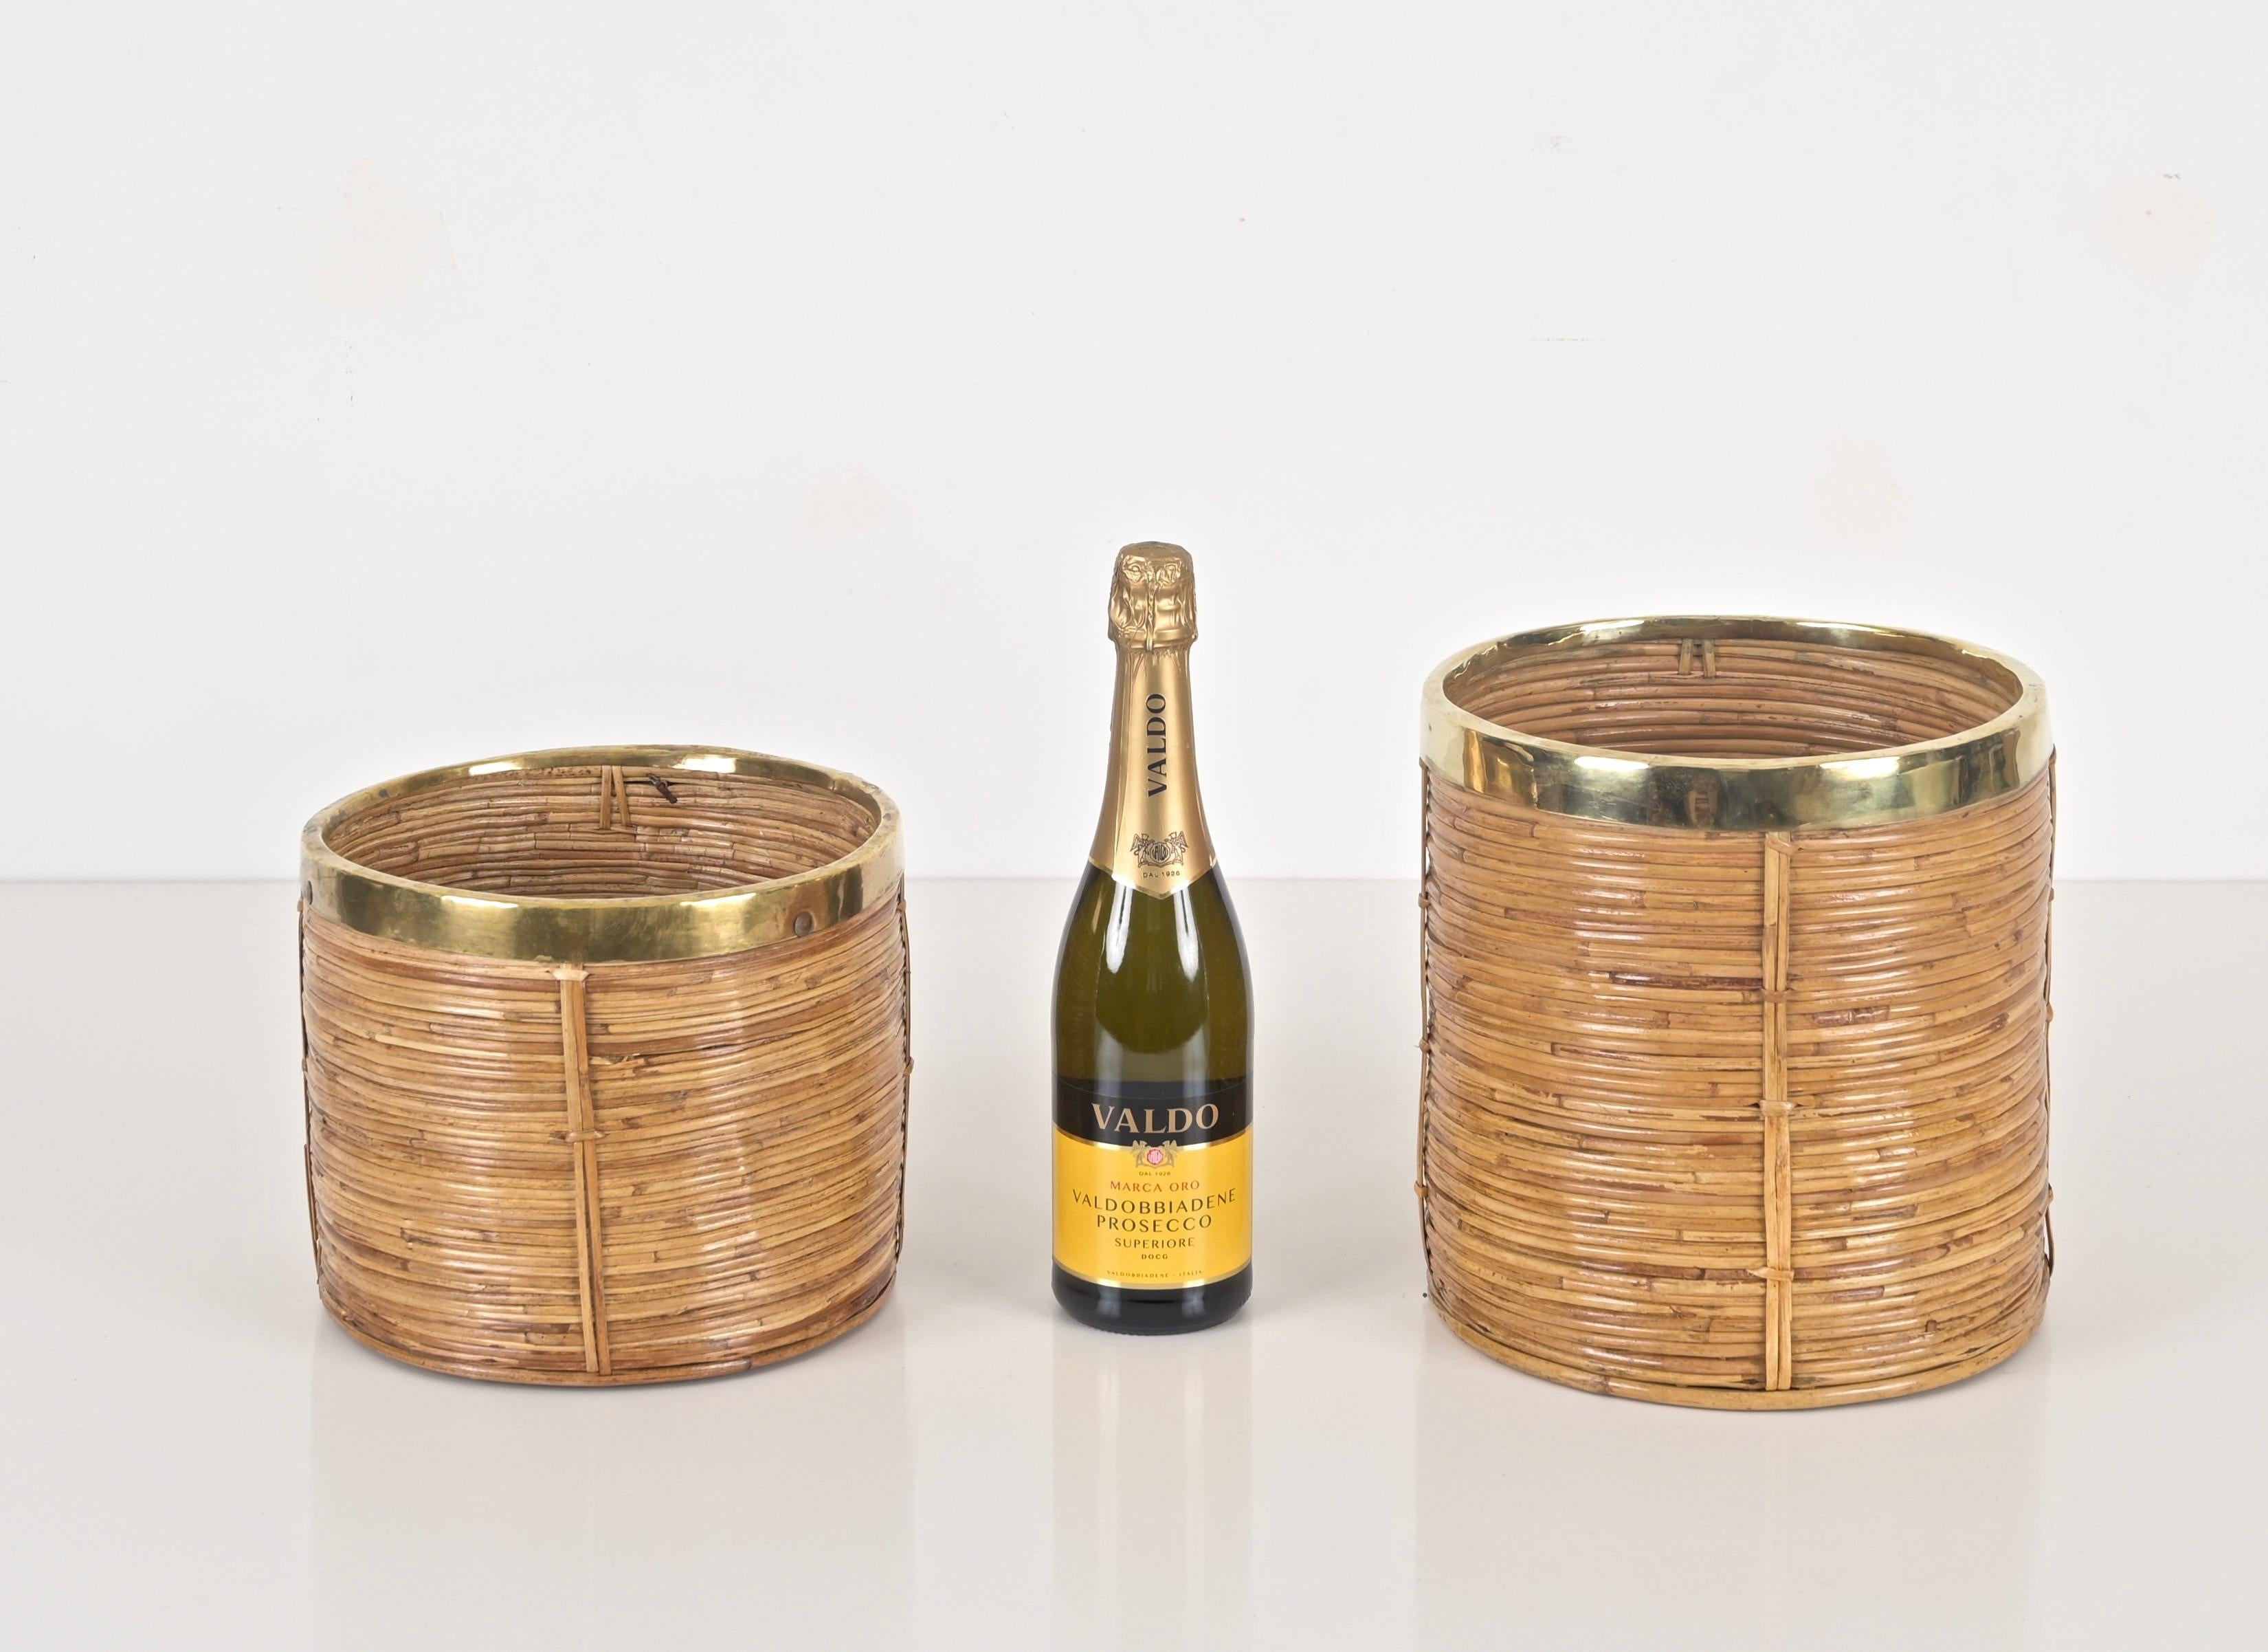 Italian Midcentury Rattan and Brass Planter or Decorative Basket, Italy 1970s For Sale